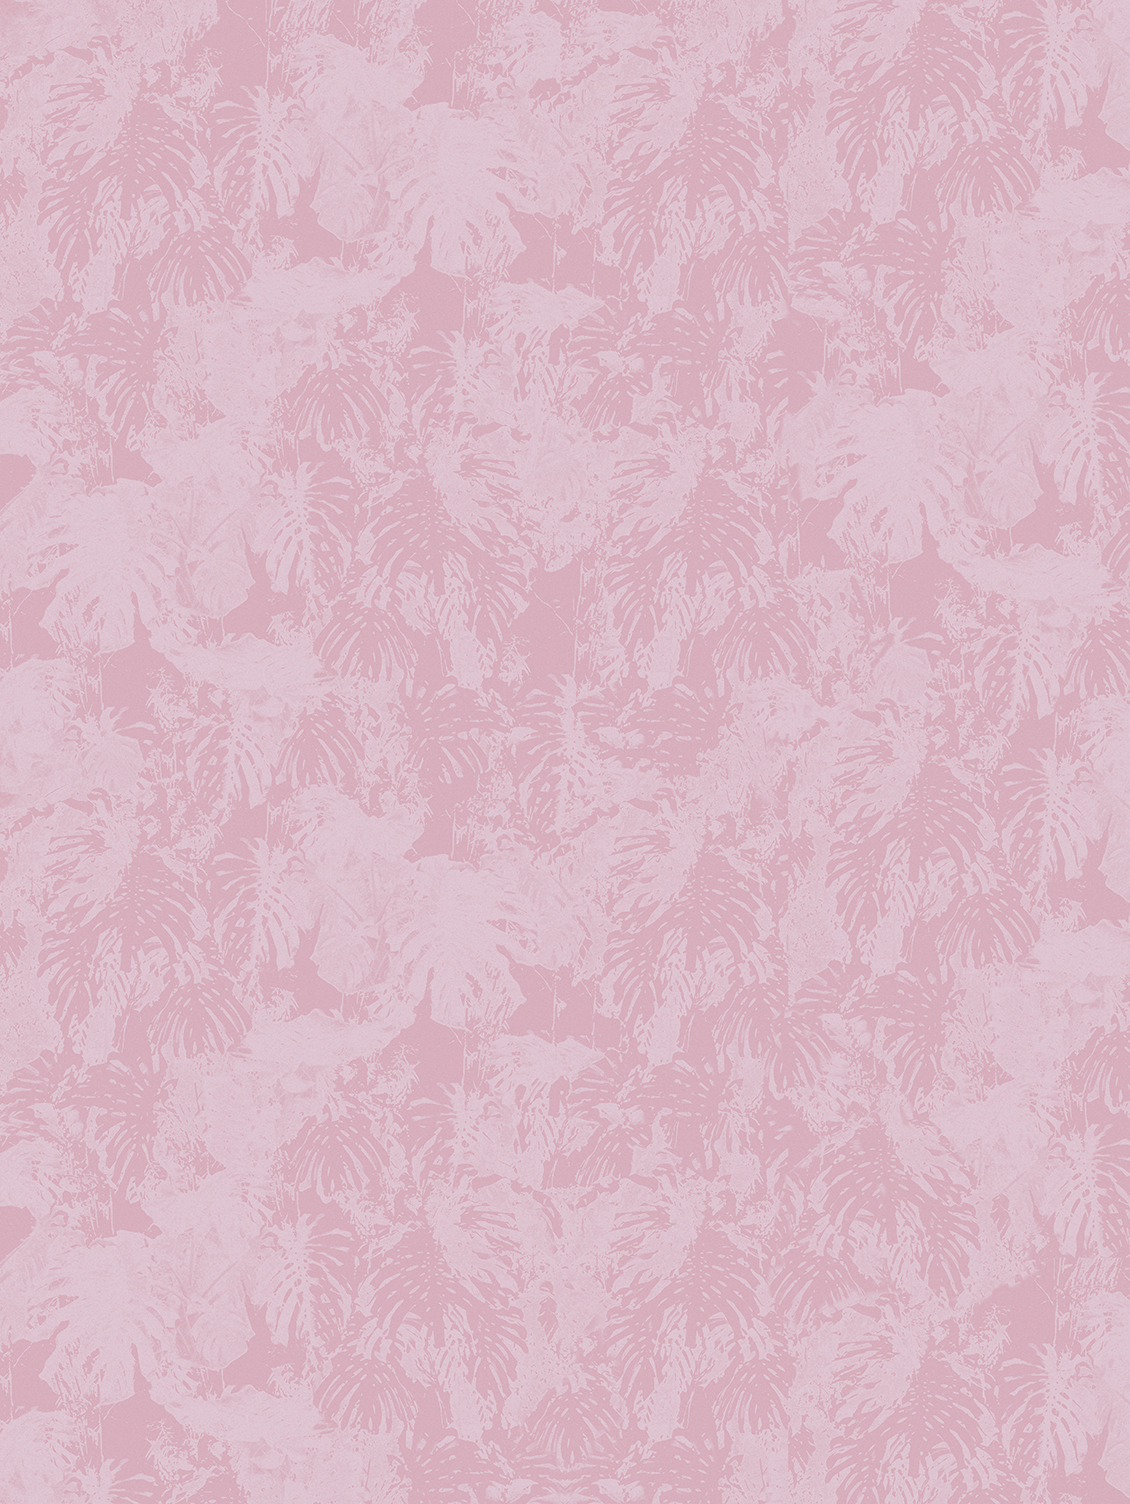 Tropical wallpaper in shades of pink with texture of palms leaves